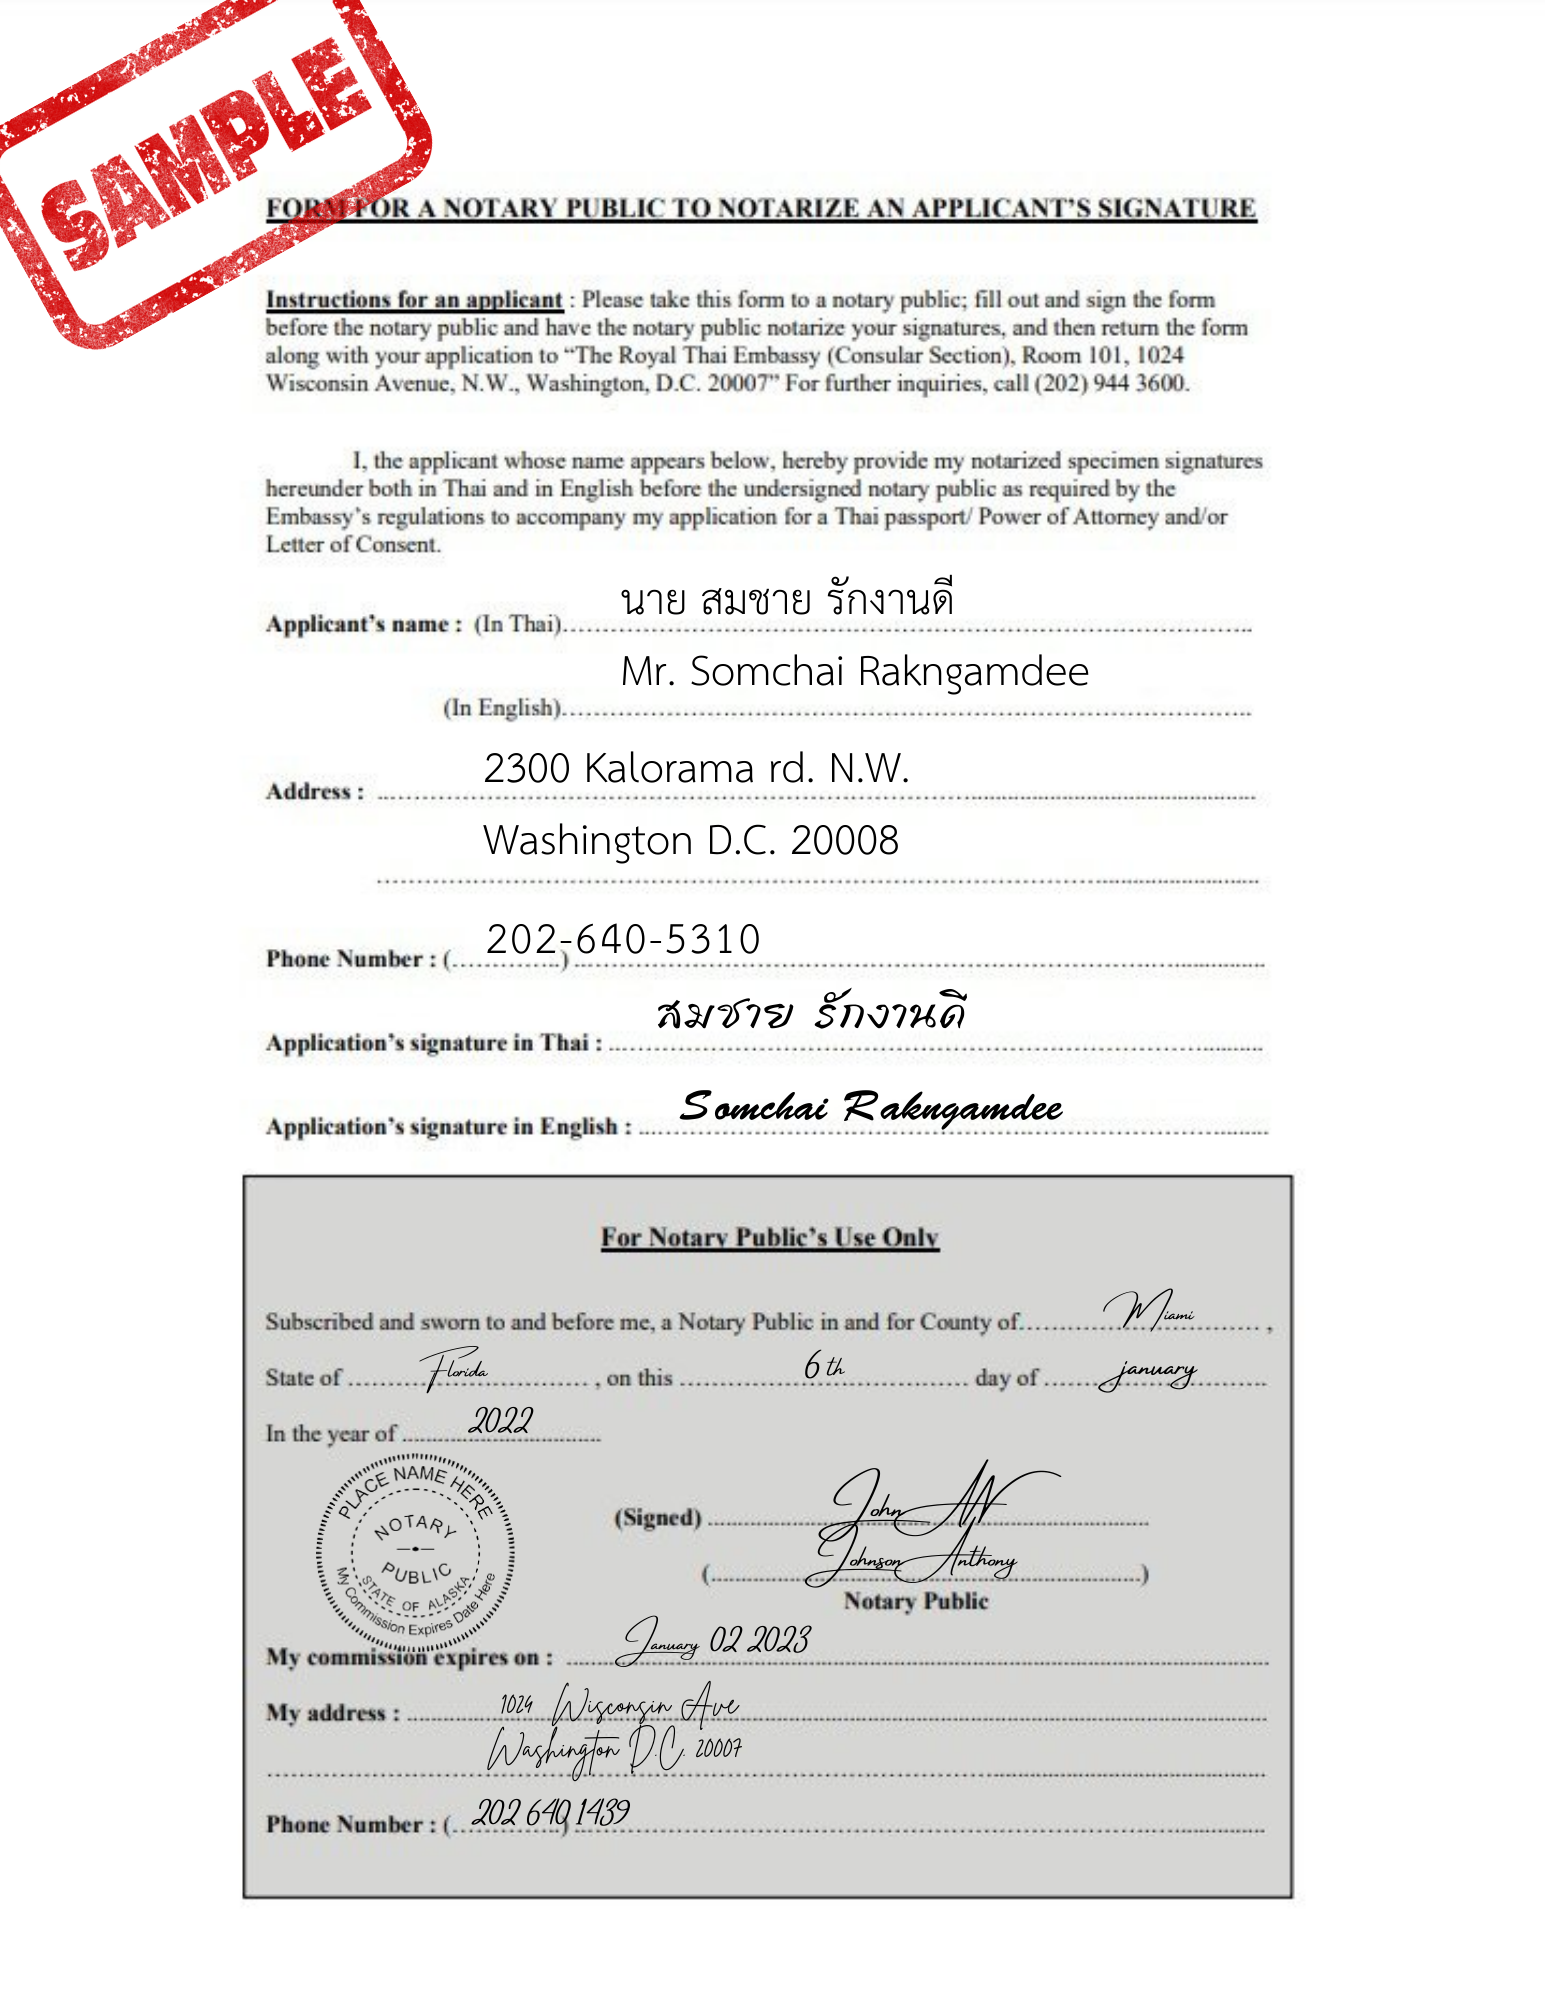 Sample-of-notary-public-for-signature